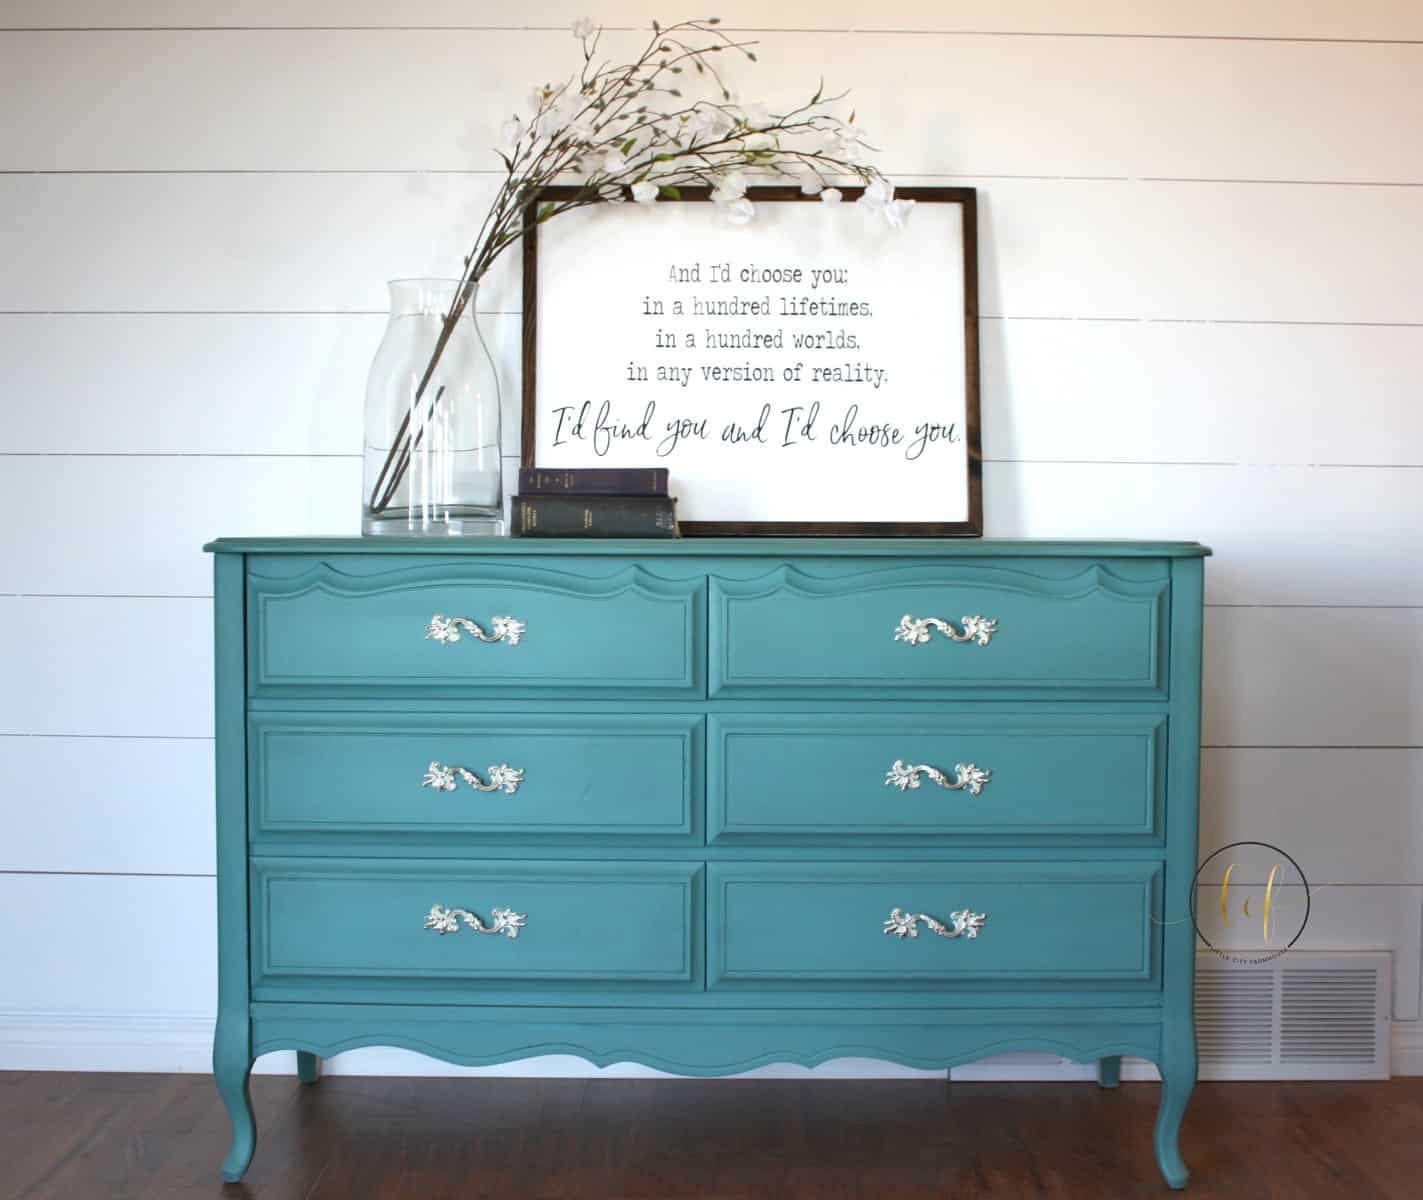 Bright, Bold, and Beautiful #DIY #furniturepaint #paintedfurniture #chalkpaint #turquoise #teal #bliss #blue #dresser #bedroom #countrychicpaint - blog.countrychicpaint.com